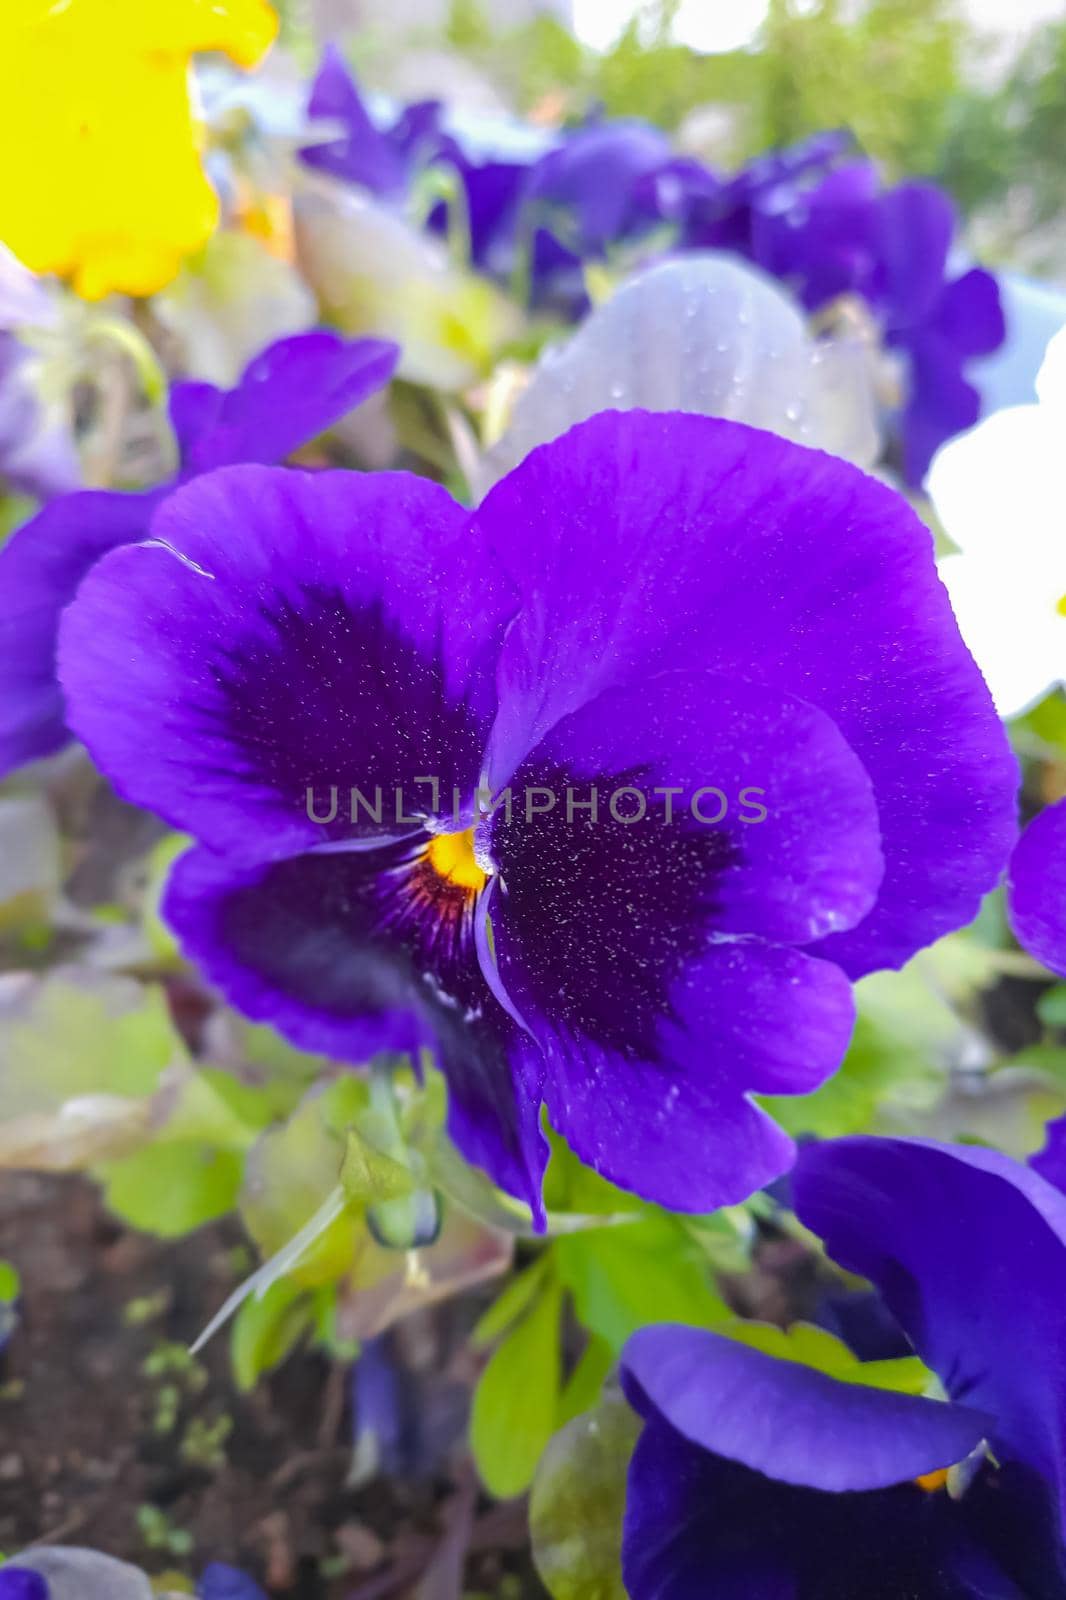 Beautiful and unique in its beauty flowers Pansies by kip02kas